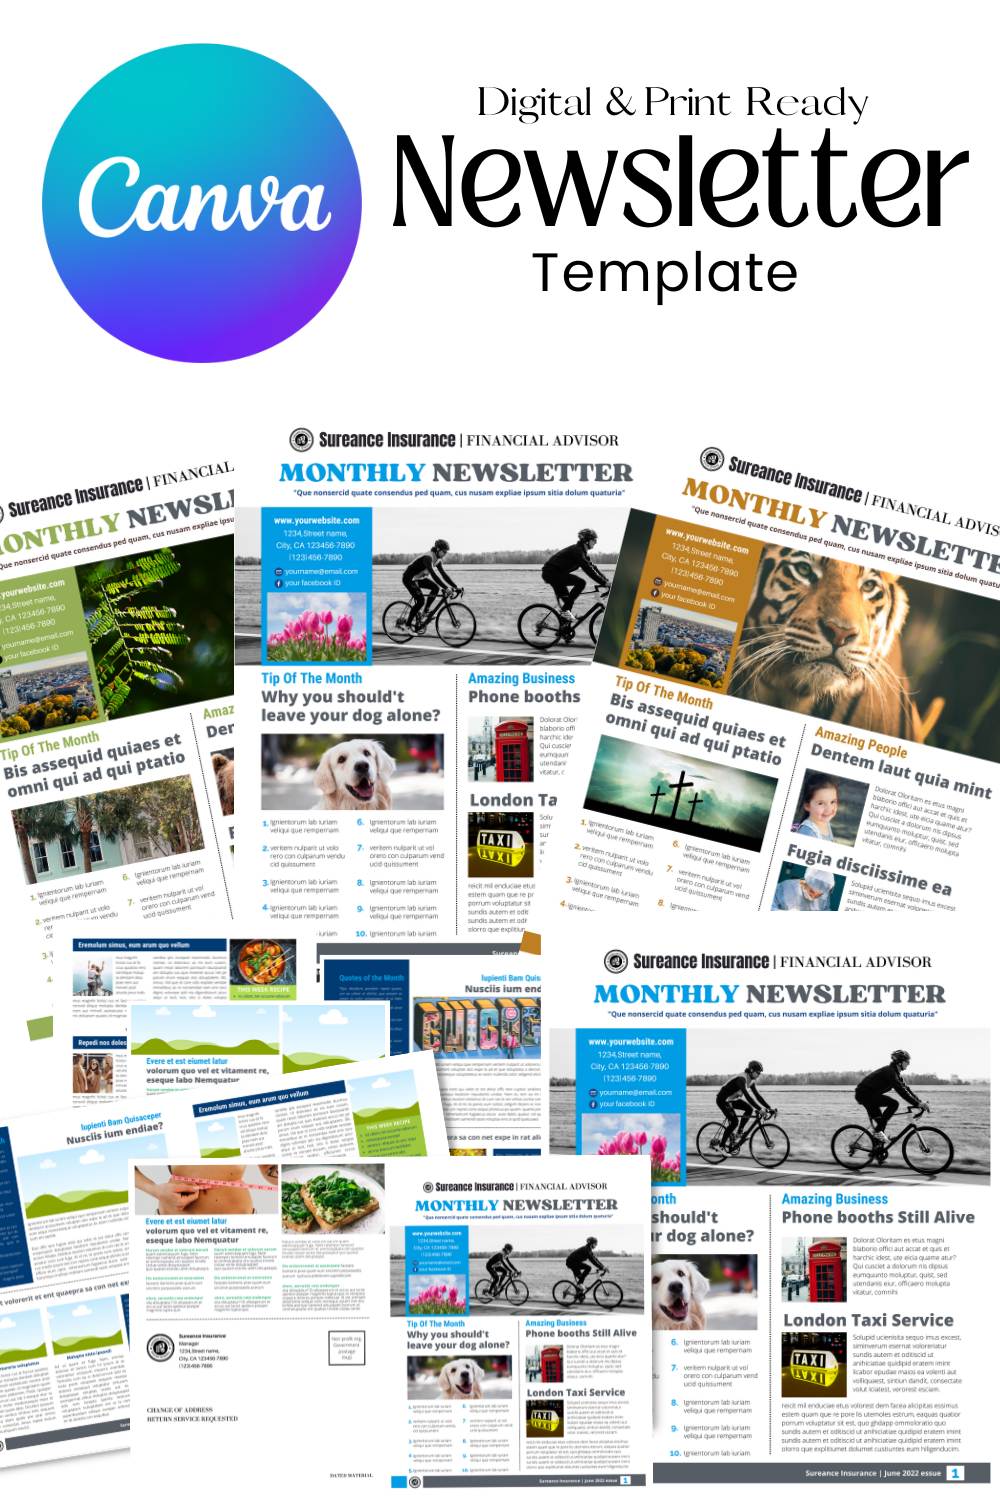 Canva Newsletter Template Financial and Business pinterest image.